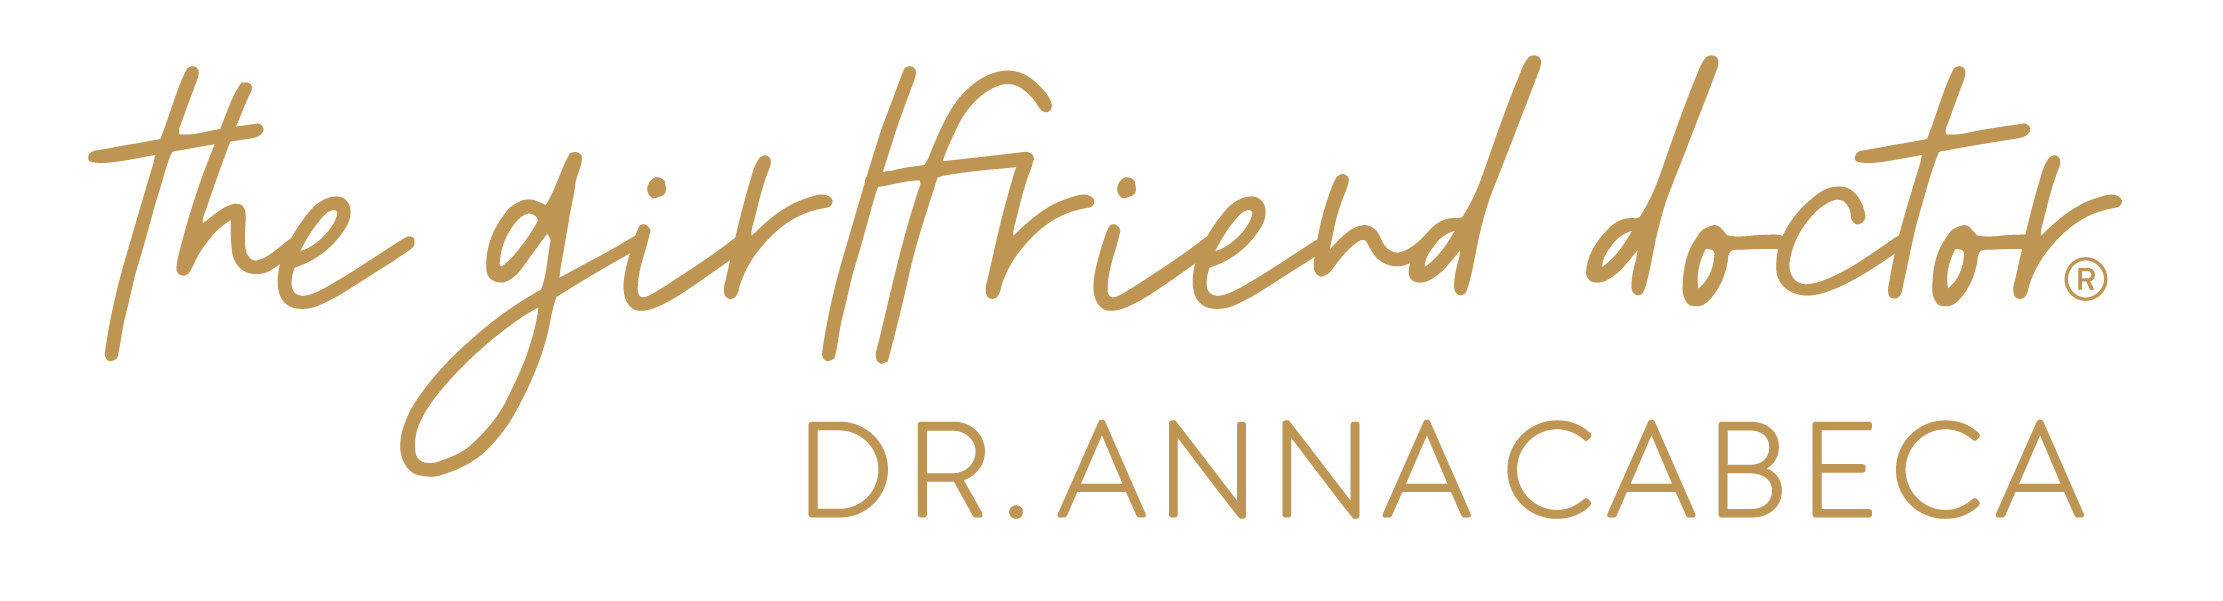 The Girlfriend Doctor, Dr. Anna Cabeca logo